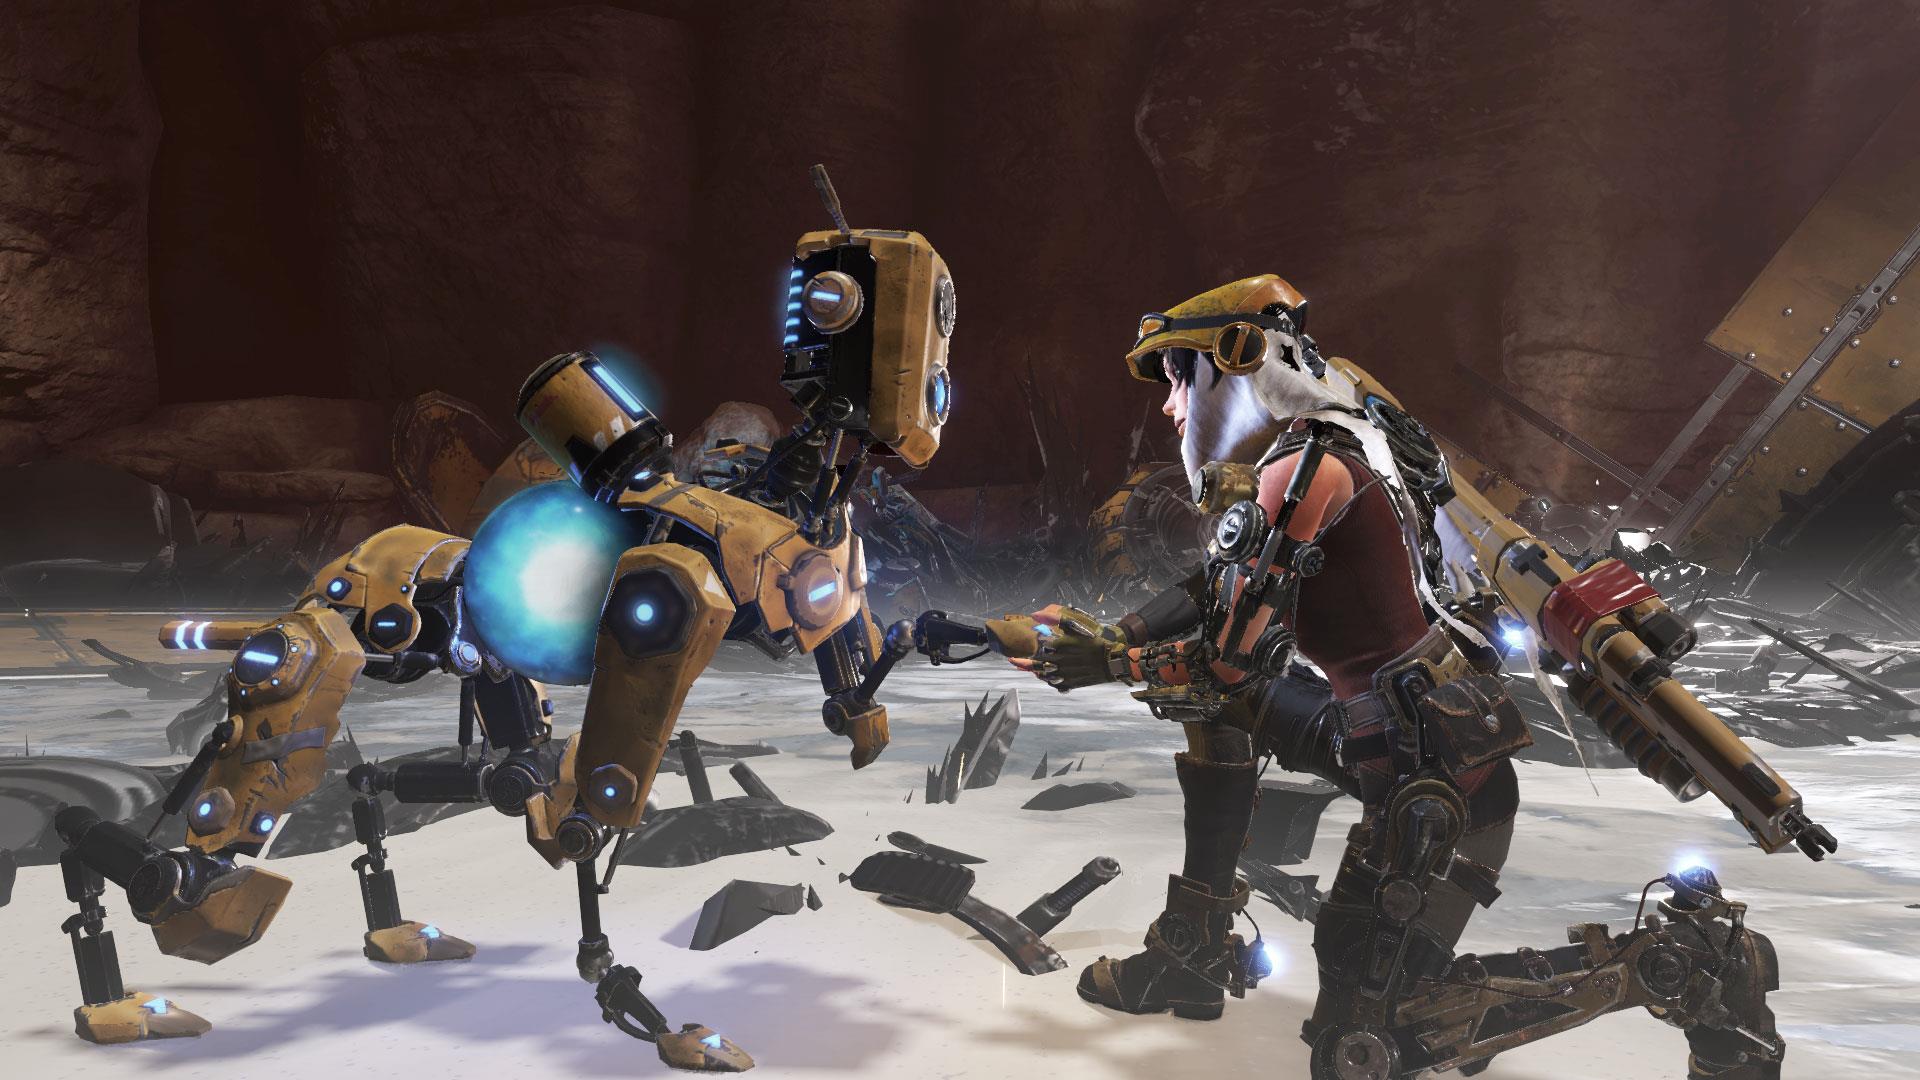 Image for ReCore's low price point due to being a new franchise despite Inafune's name attached